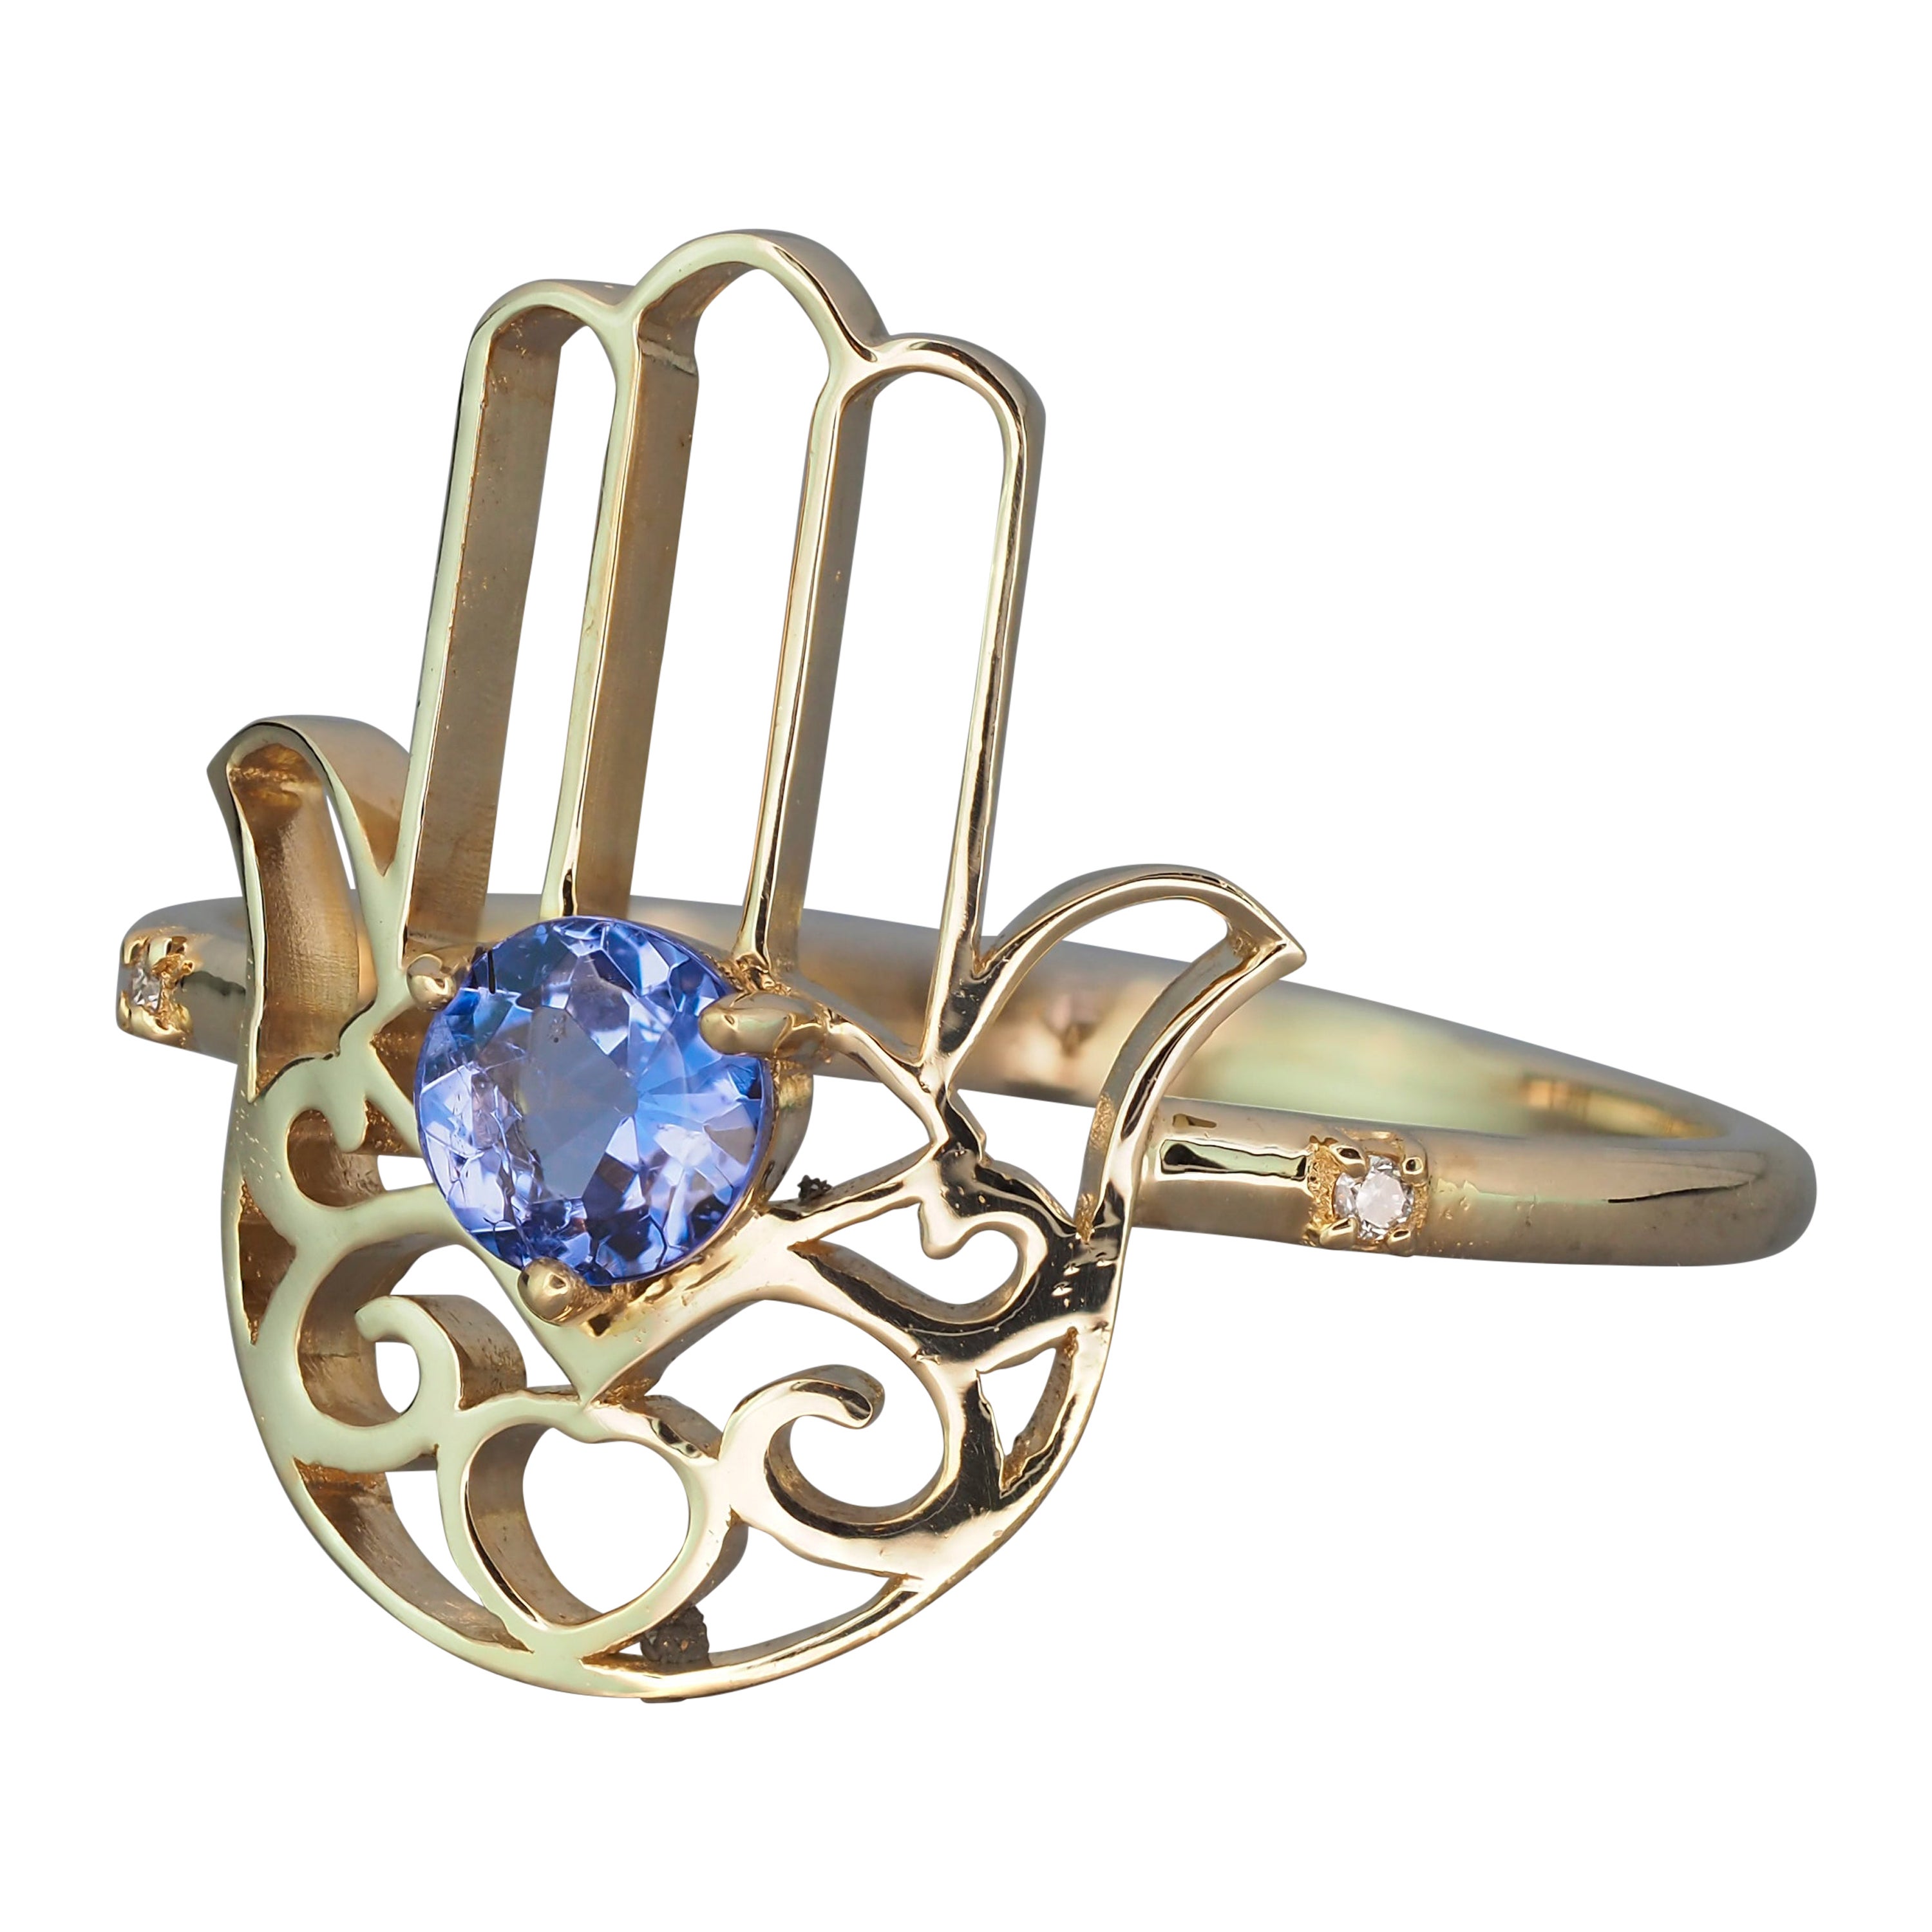 Gold Ring "Hamsa" Hand with Tanzanite in the Center and Diamonds